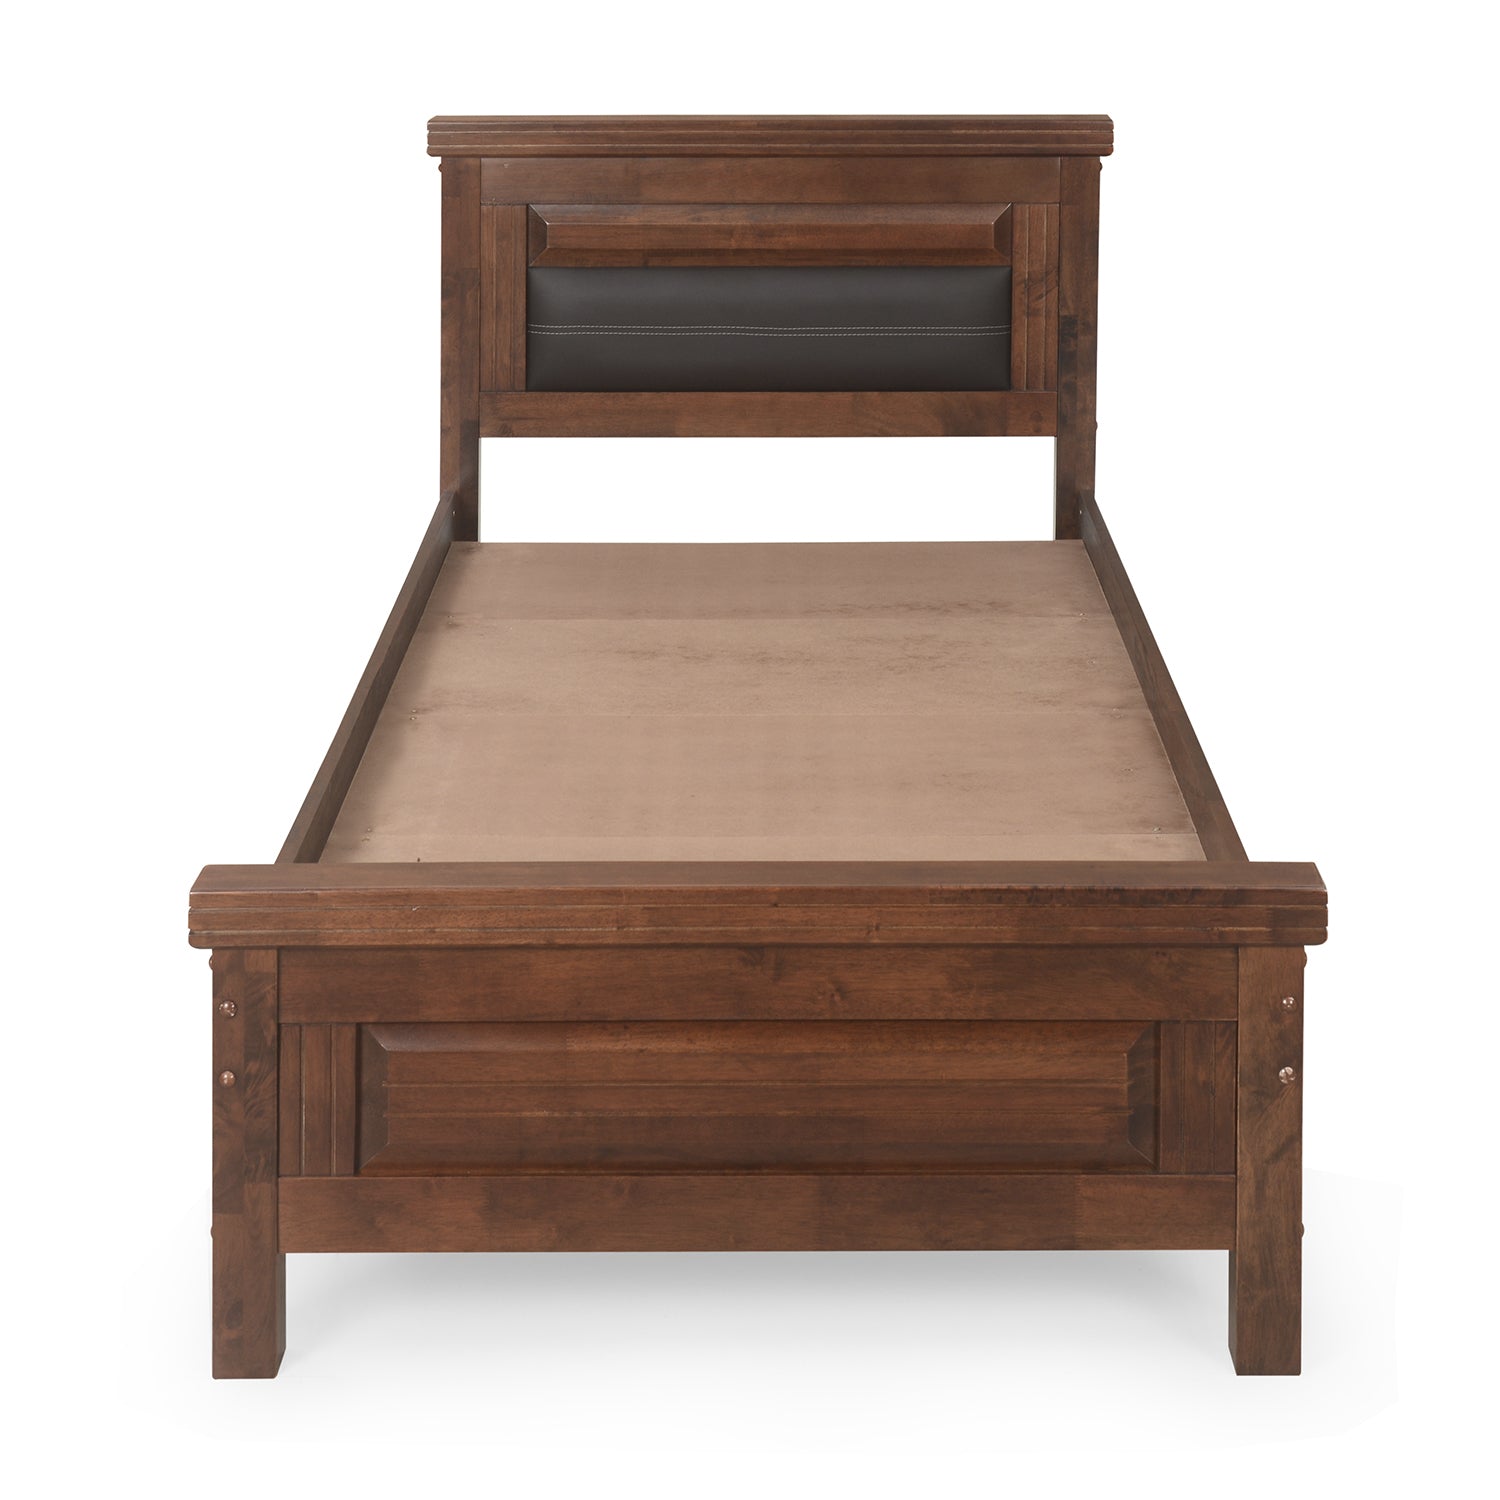 Dexter Single Bed Without Storage (Cappucino)